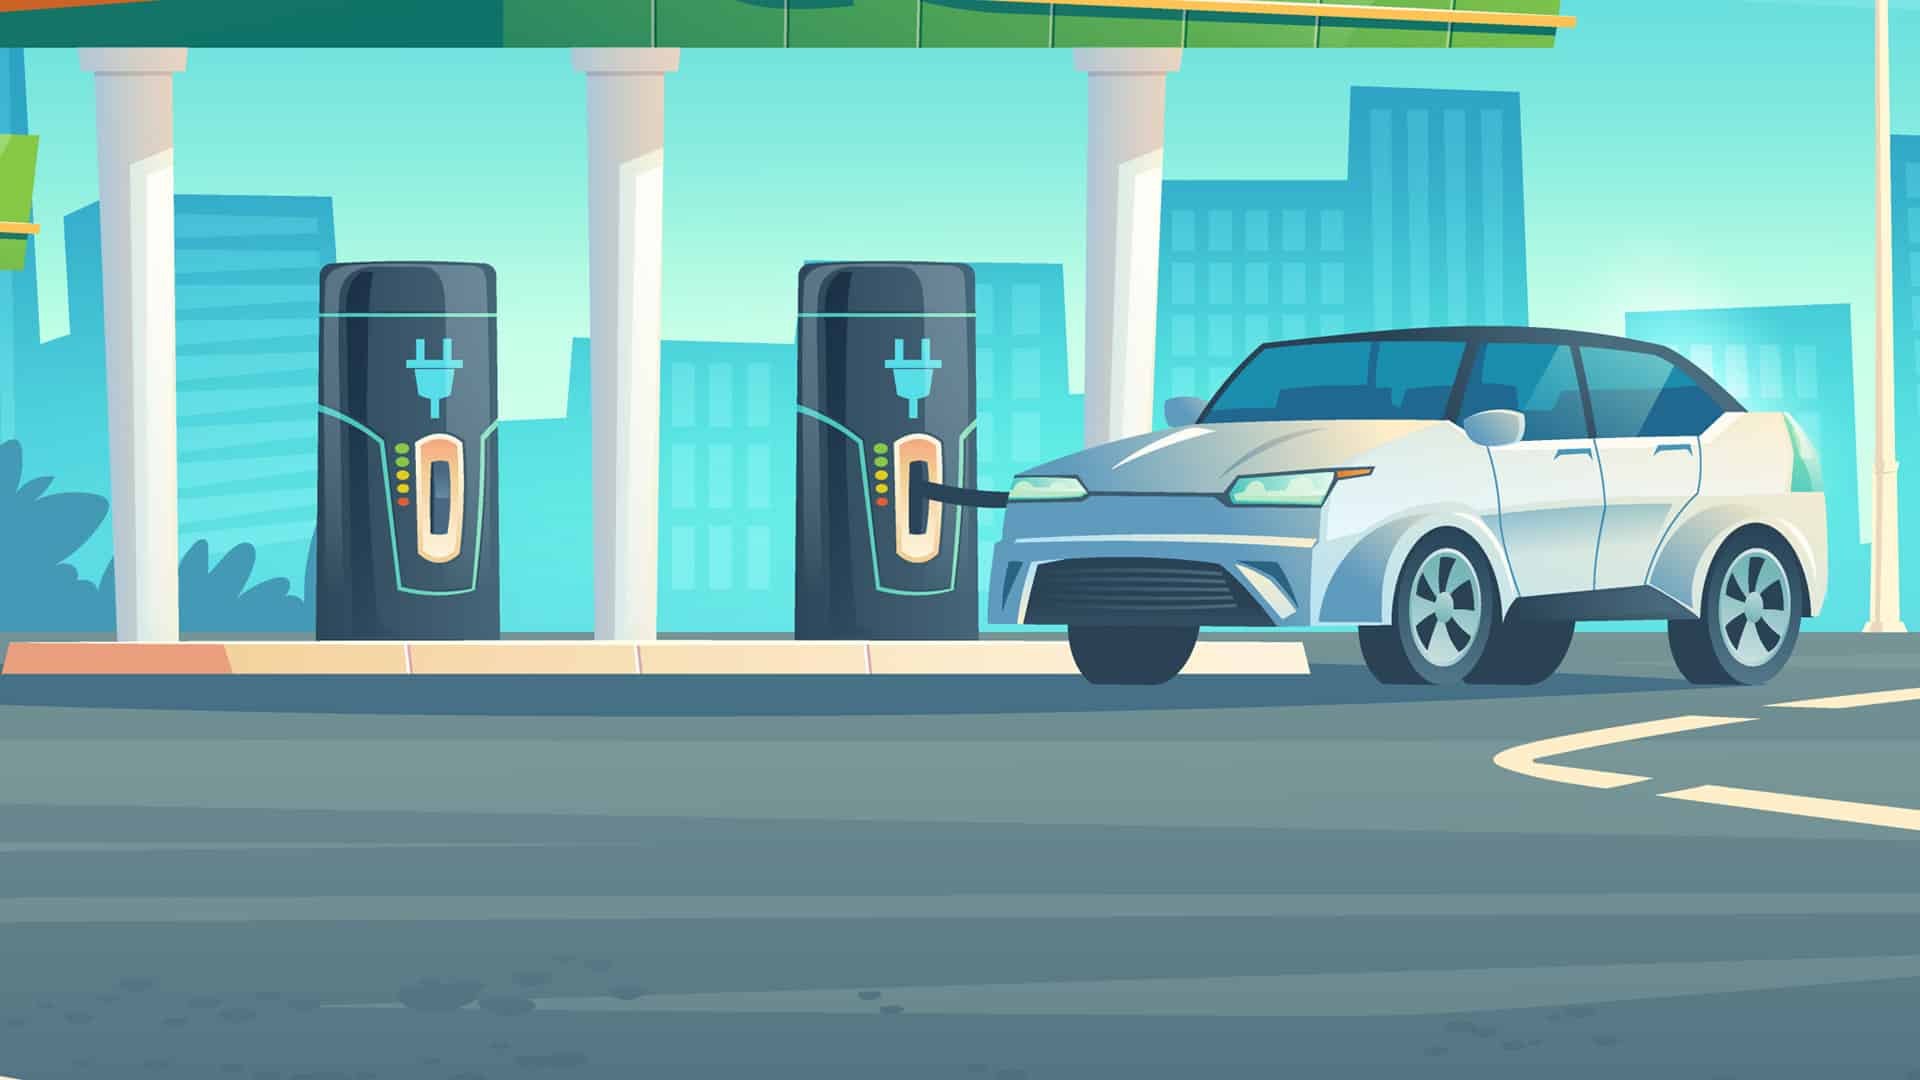 Shuchi partners with HPCL to set up EV charging points across retail fuel pumps